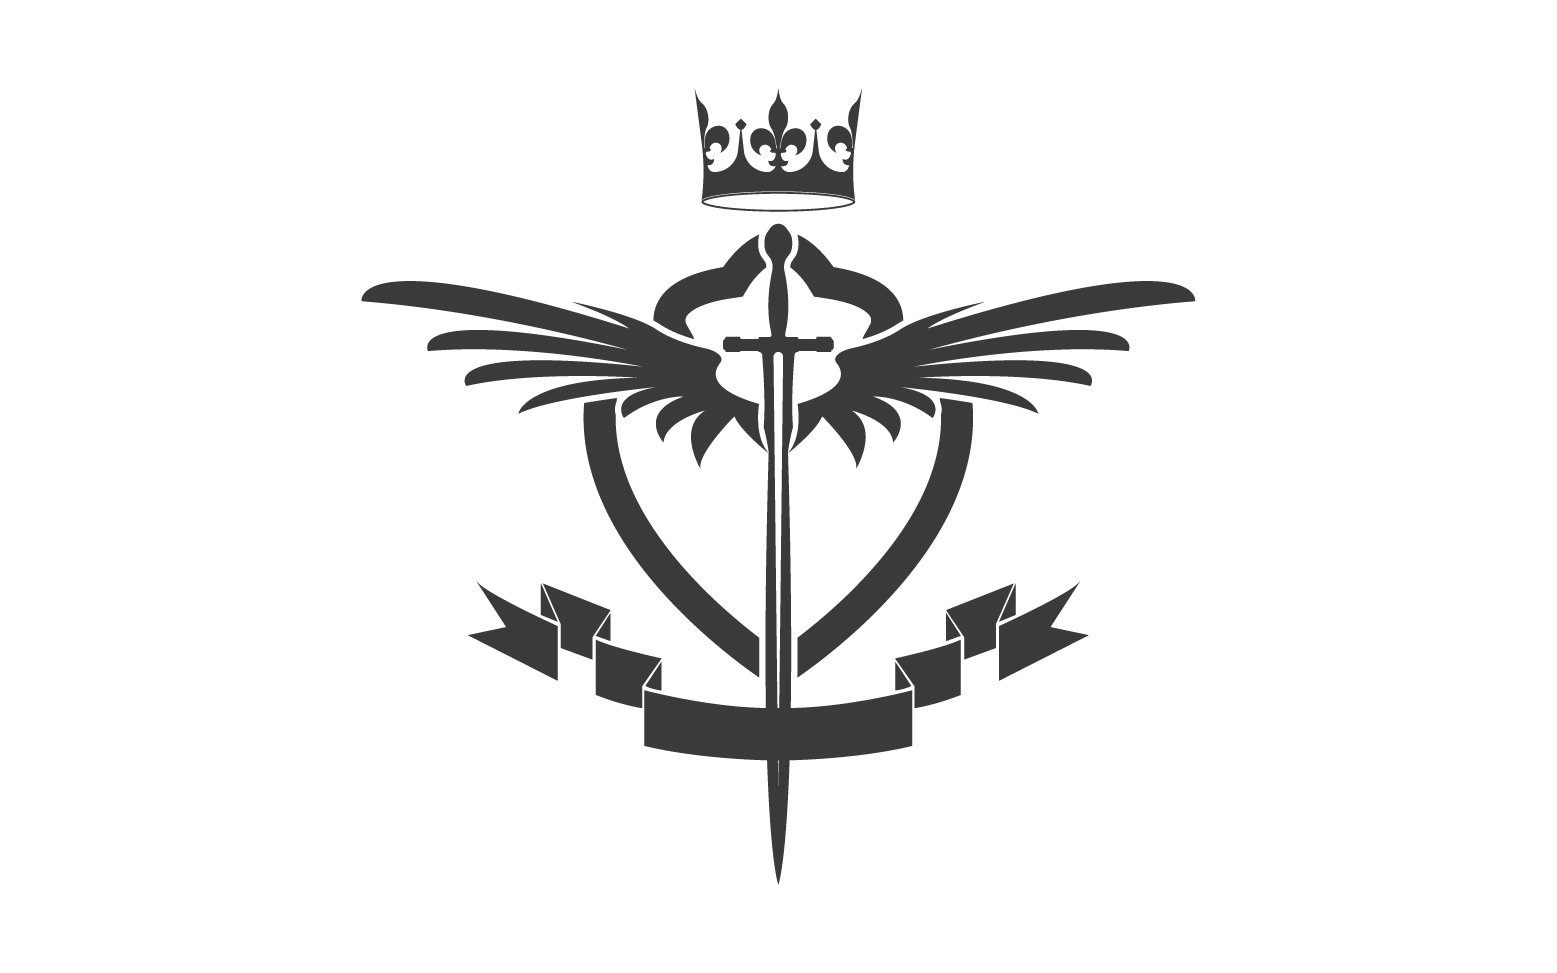 Wing sword and crown king lord logo icon v18